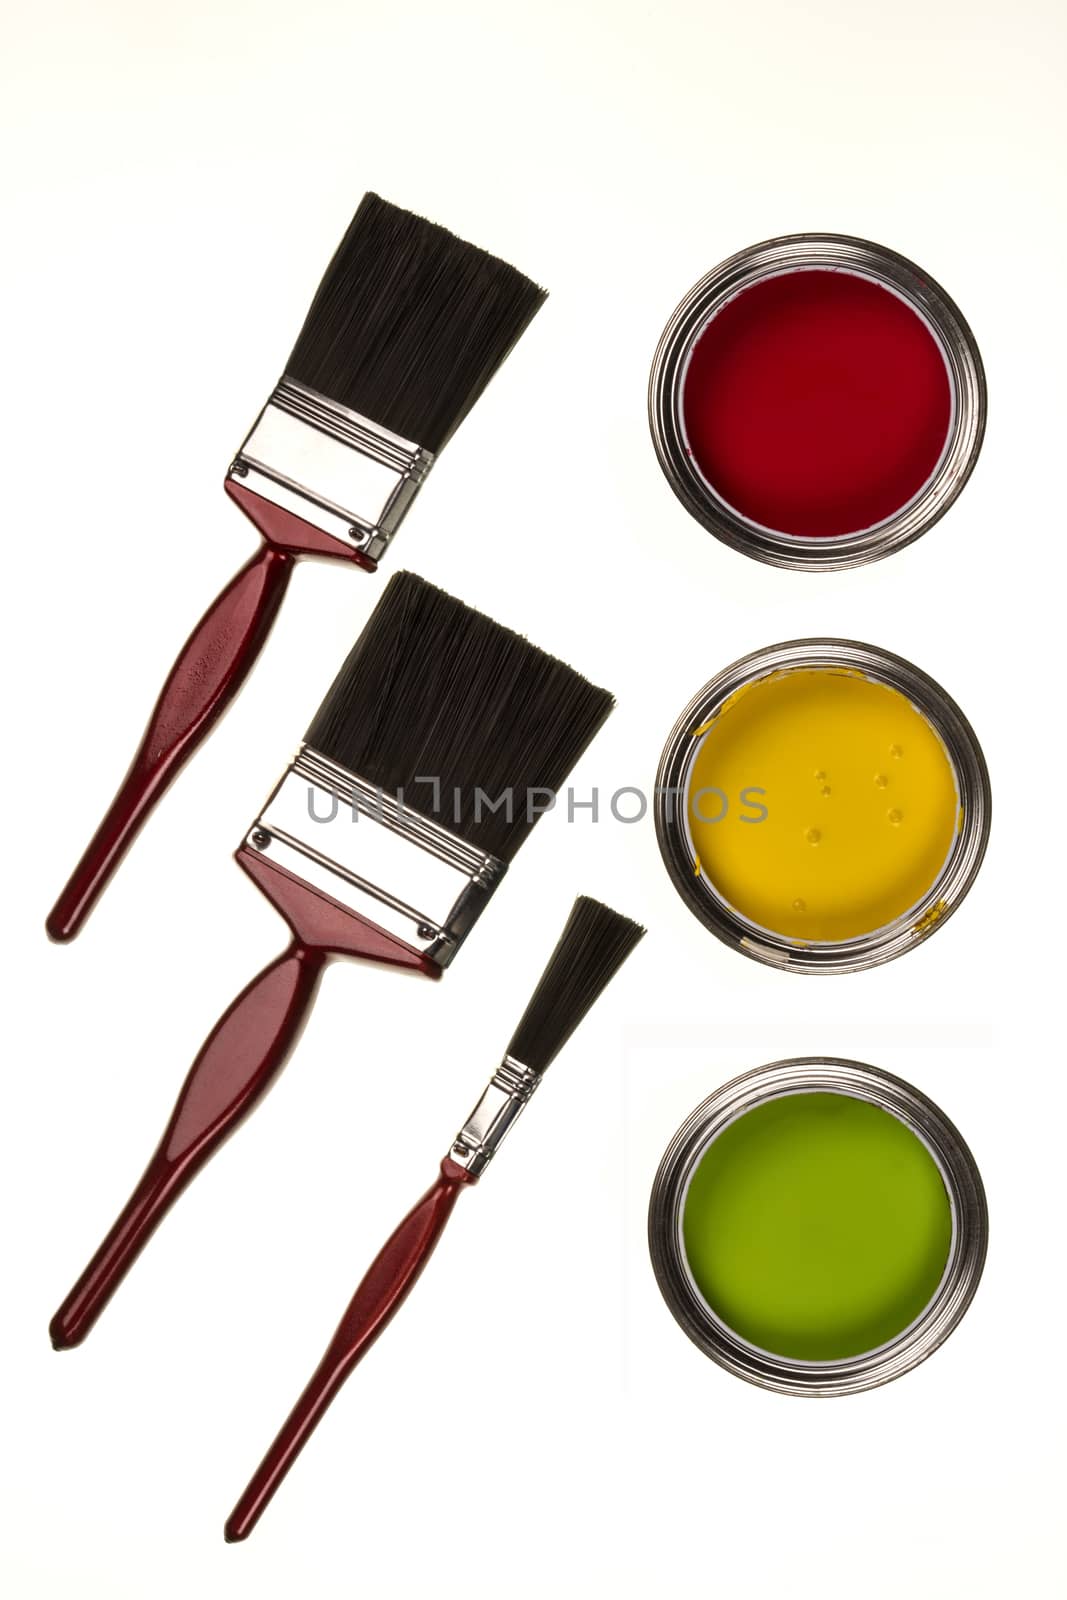 Selection of paints and paintbrushes - isolated